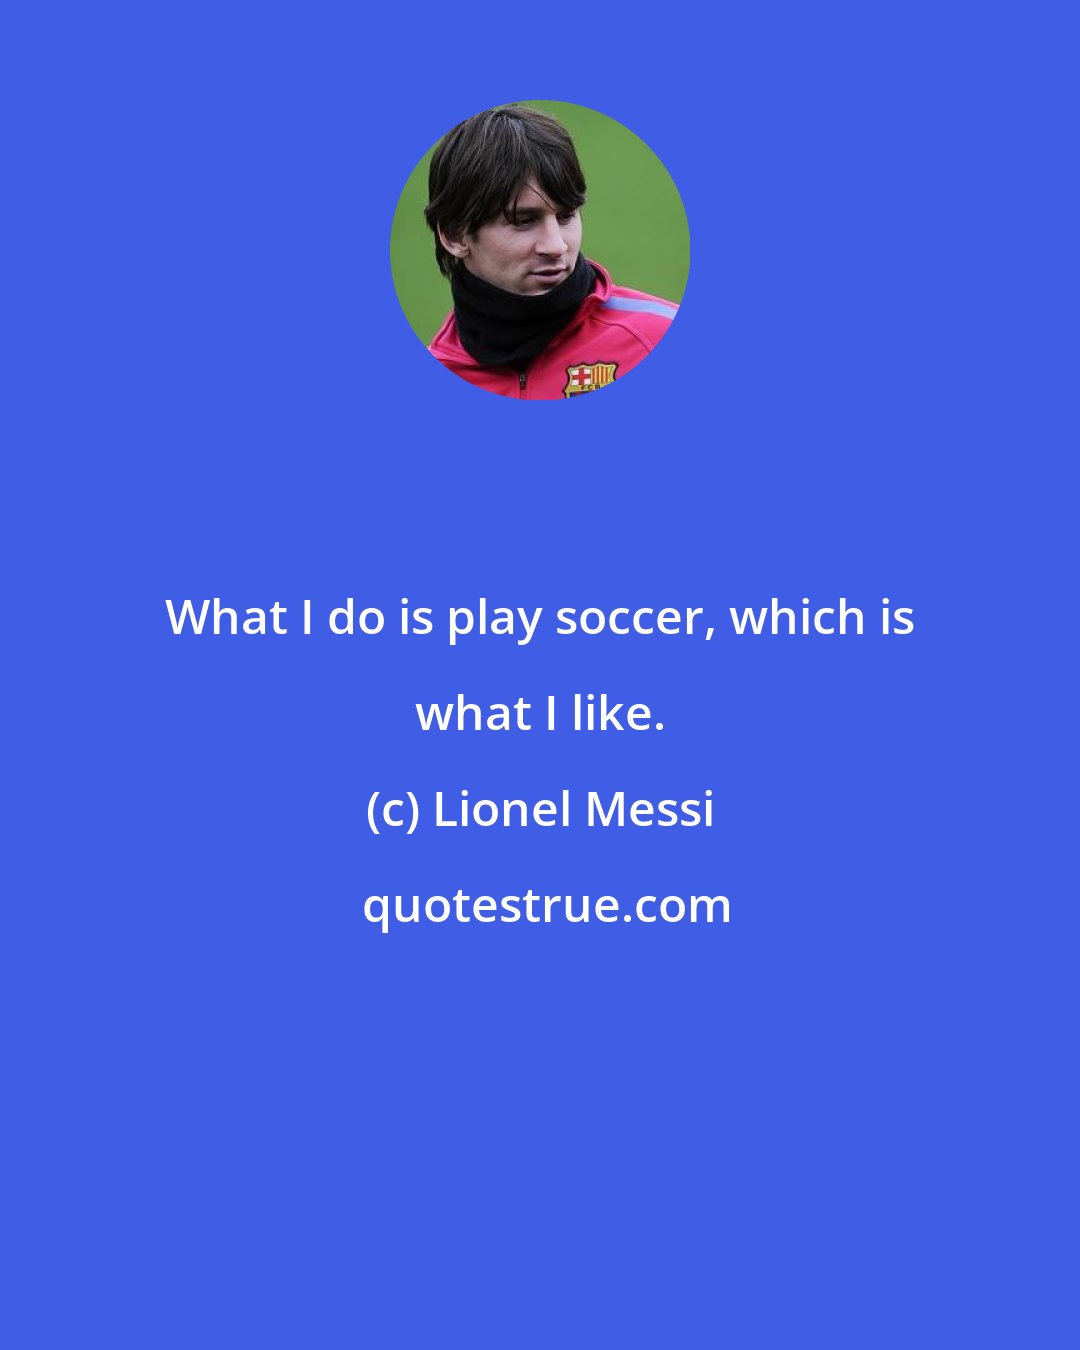 Lionel Messi: What I do is play soccer, which is what I like.